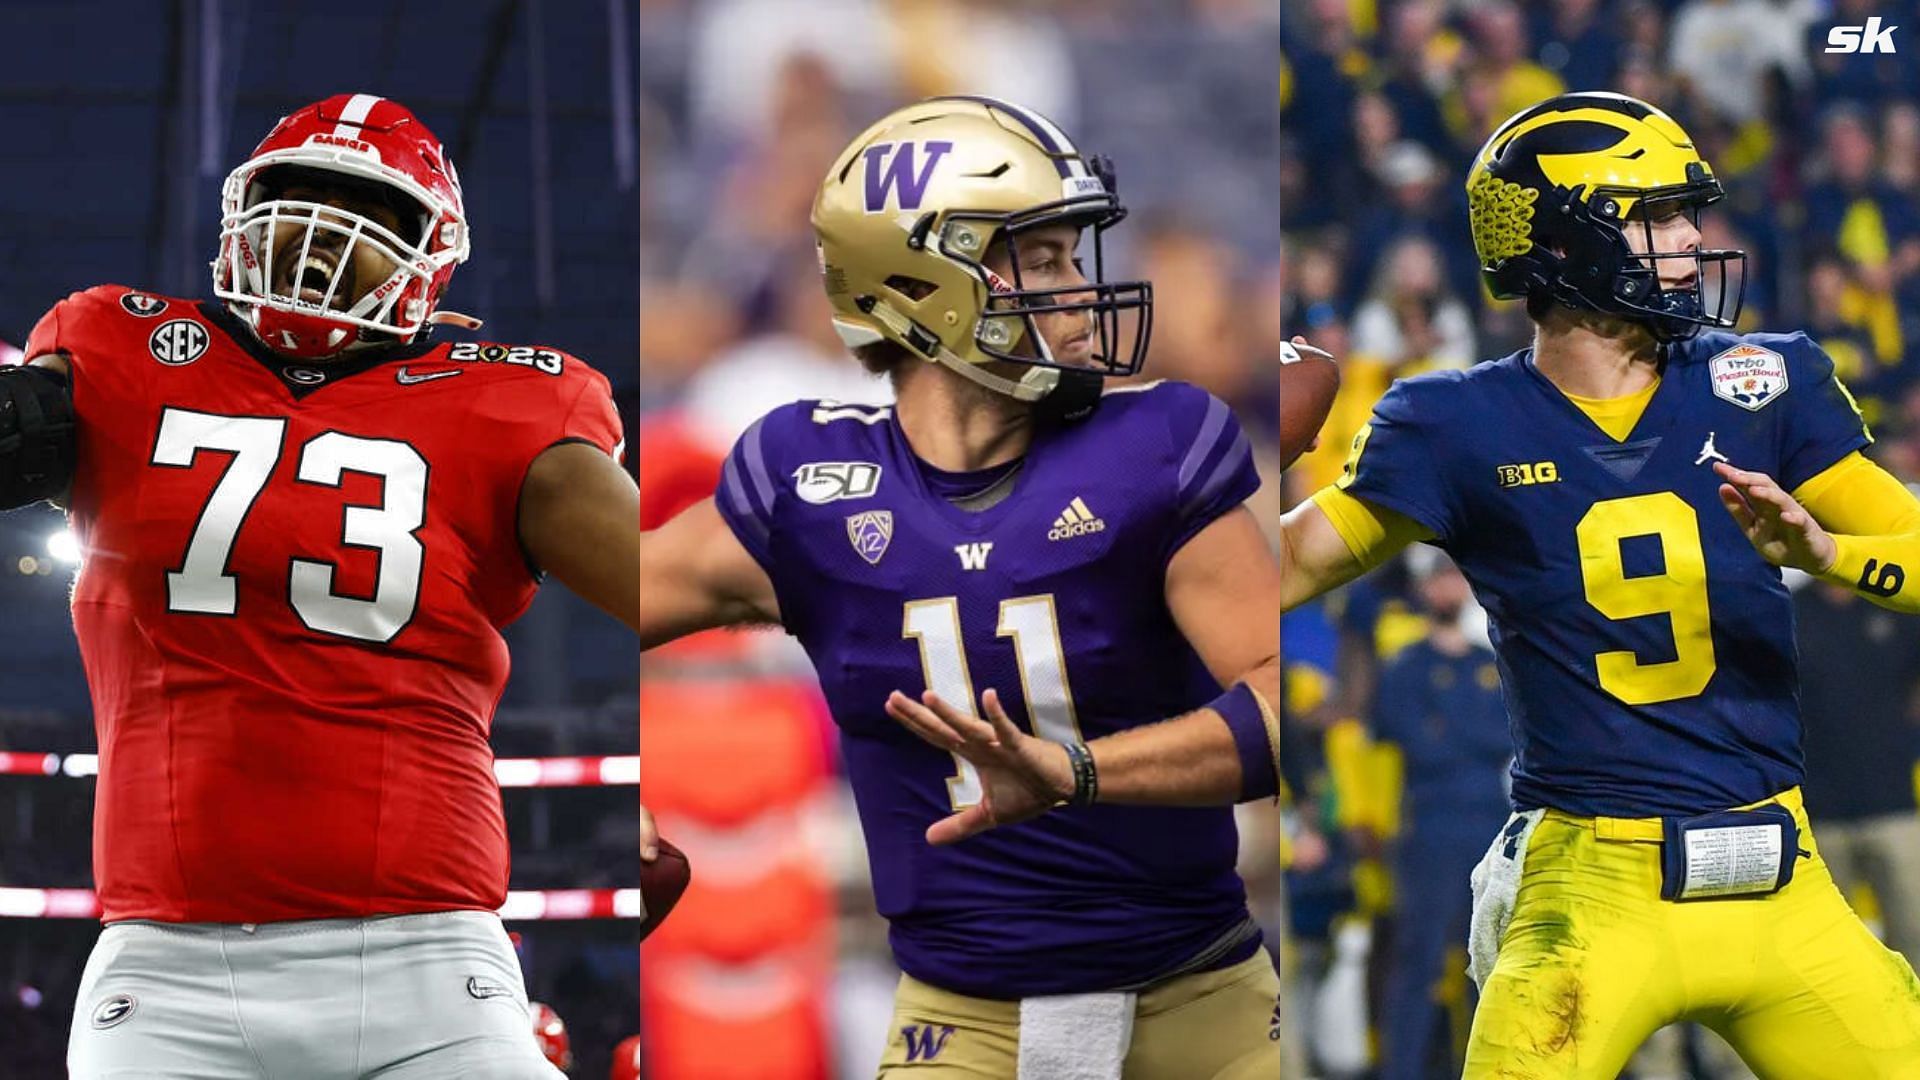 CFP Rankings Updated College Football Playoff rankings after Week 13